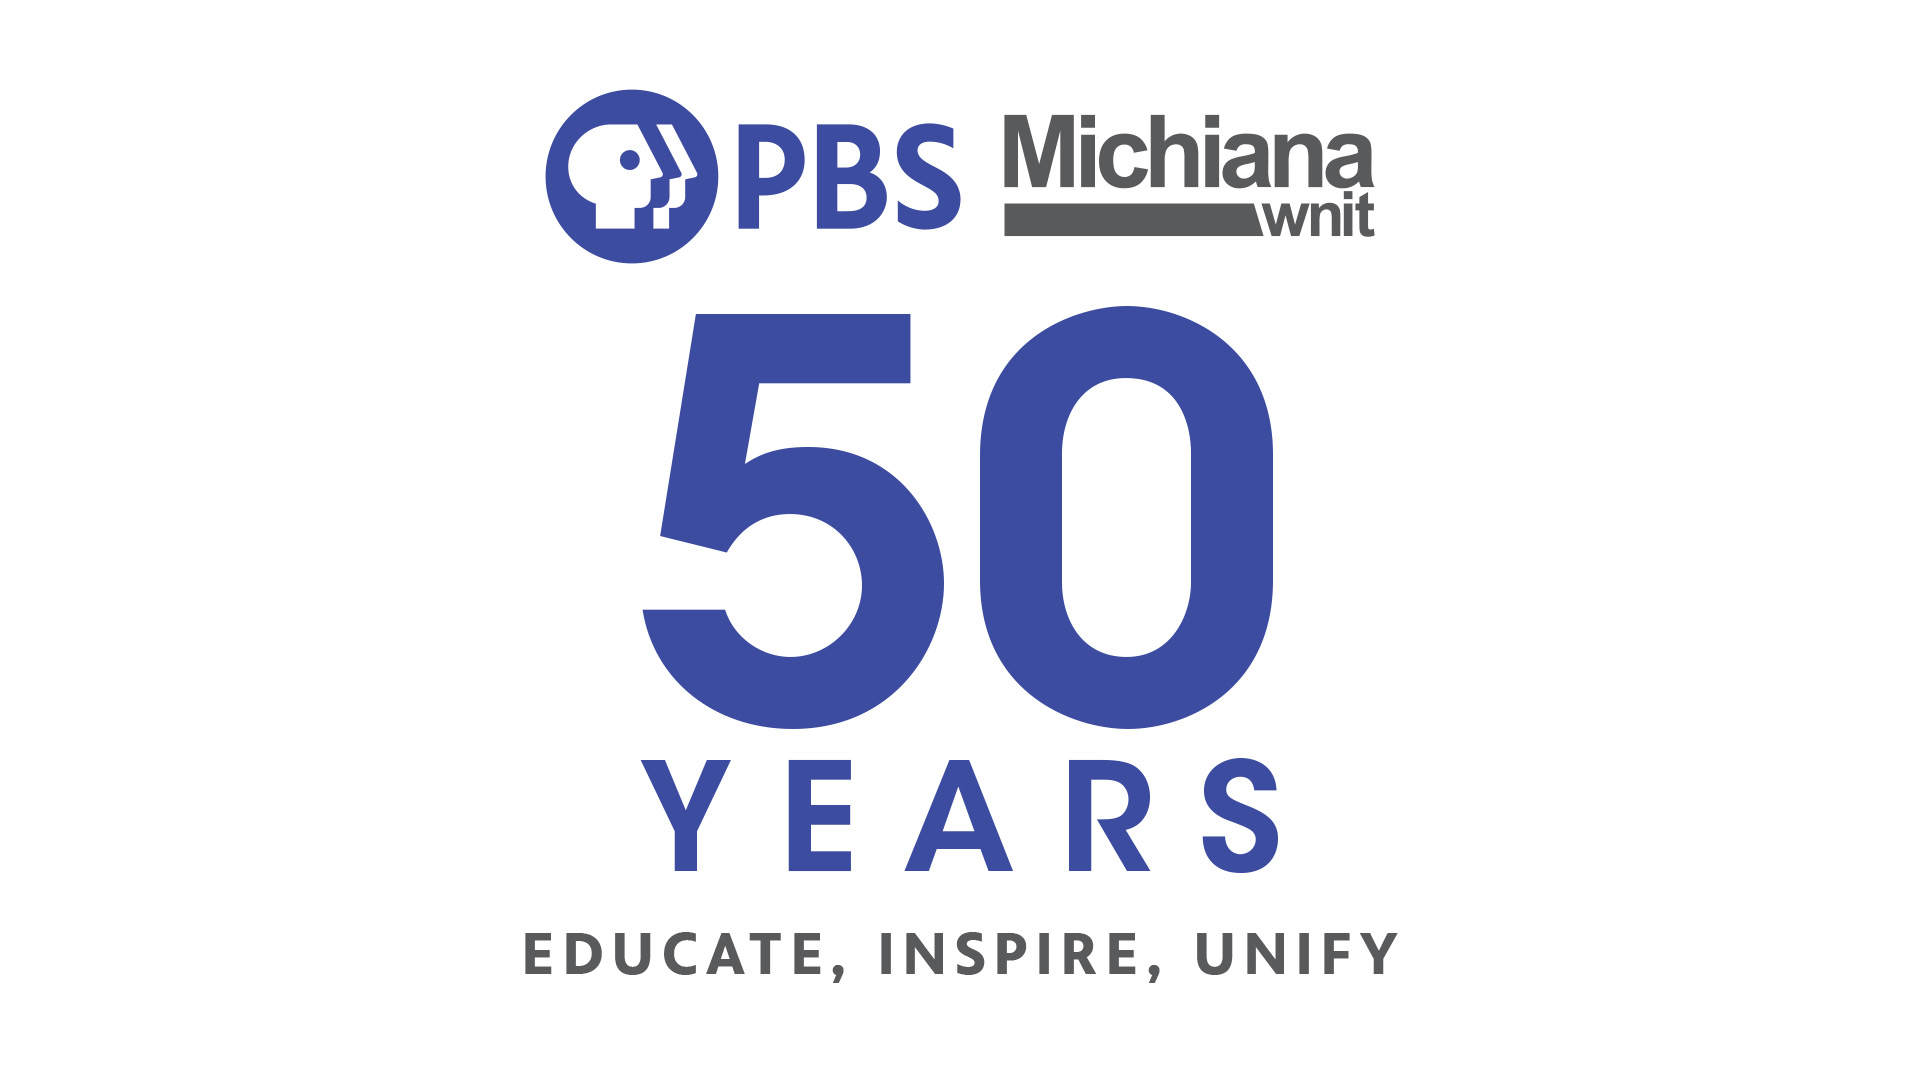 PBS Michiana – WNIT Celebrates 50 Years of Educational Excellence,  Inspiring Audiences, and Unifying Communities Image